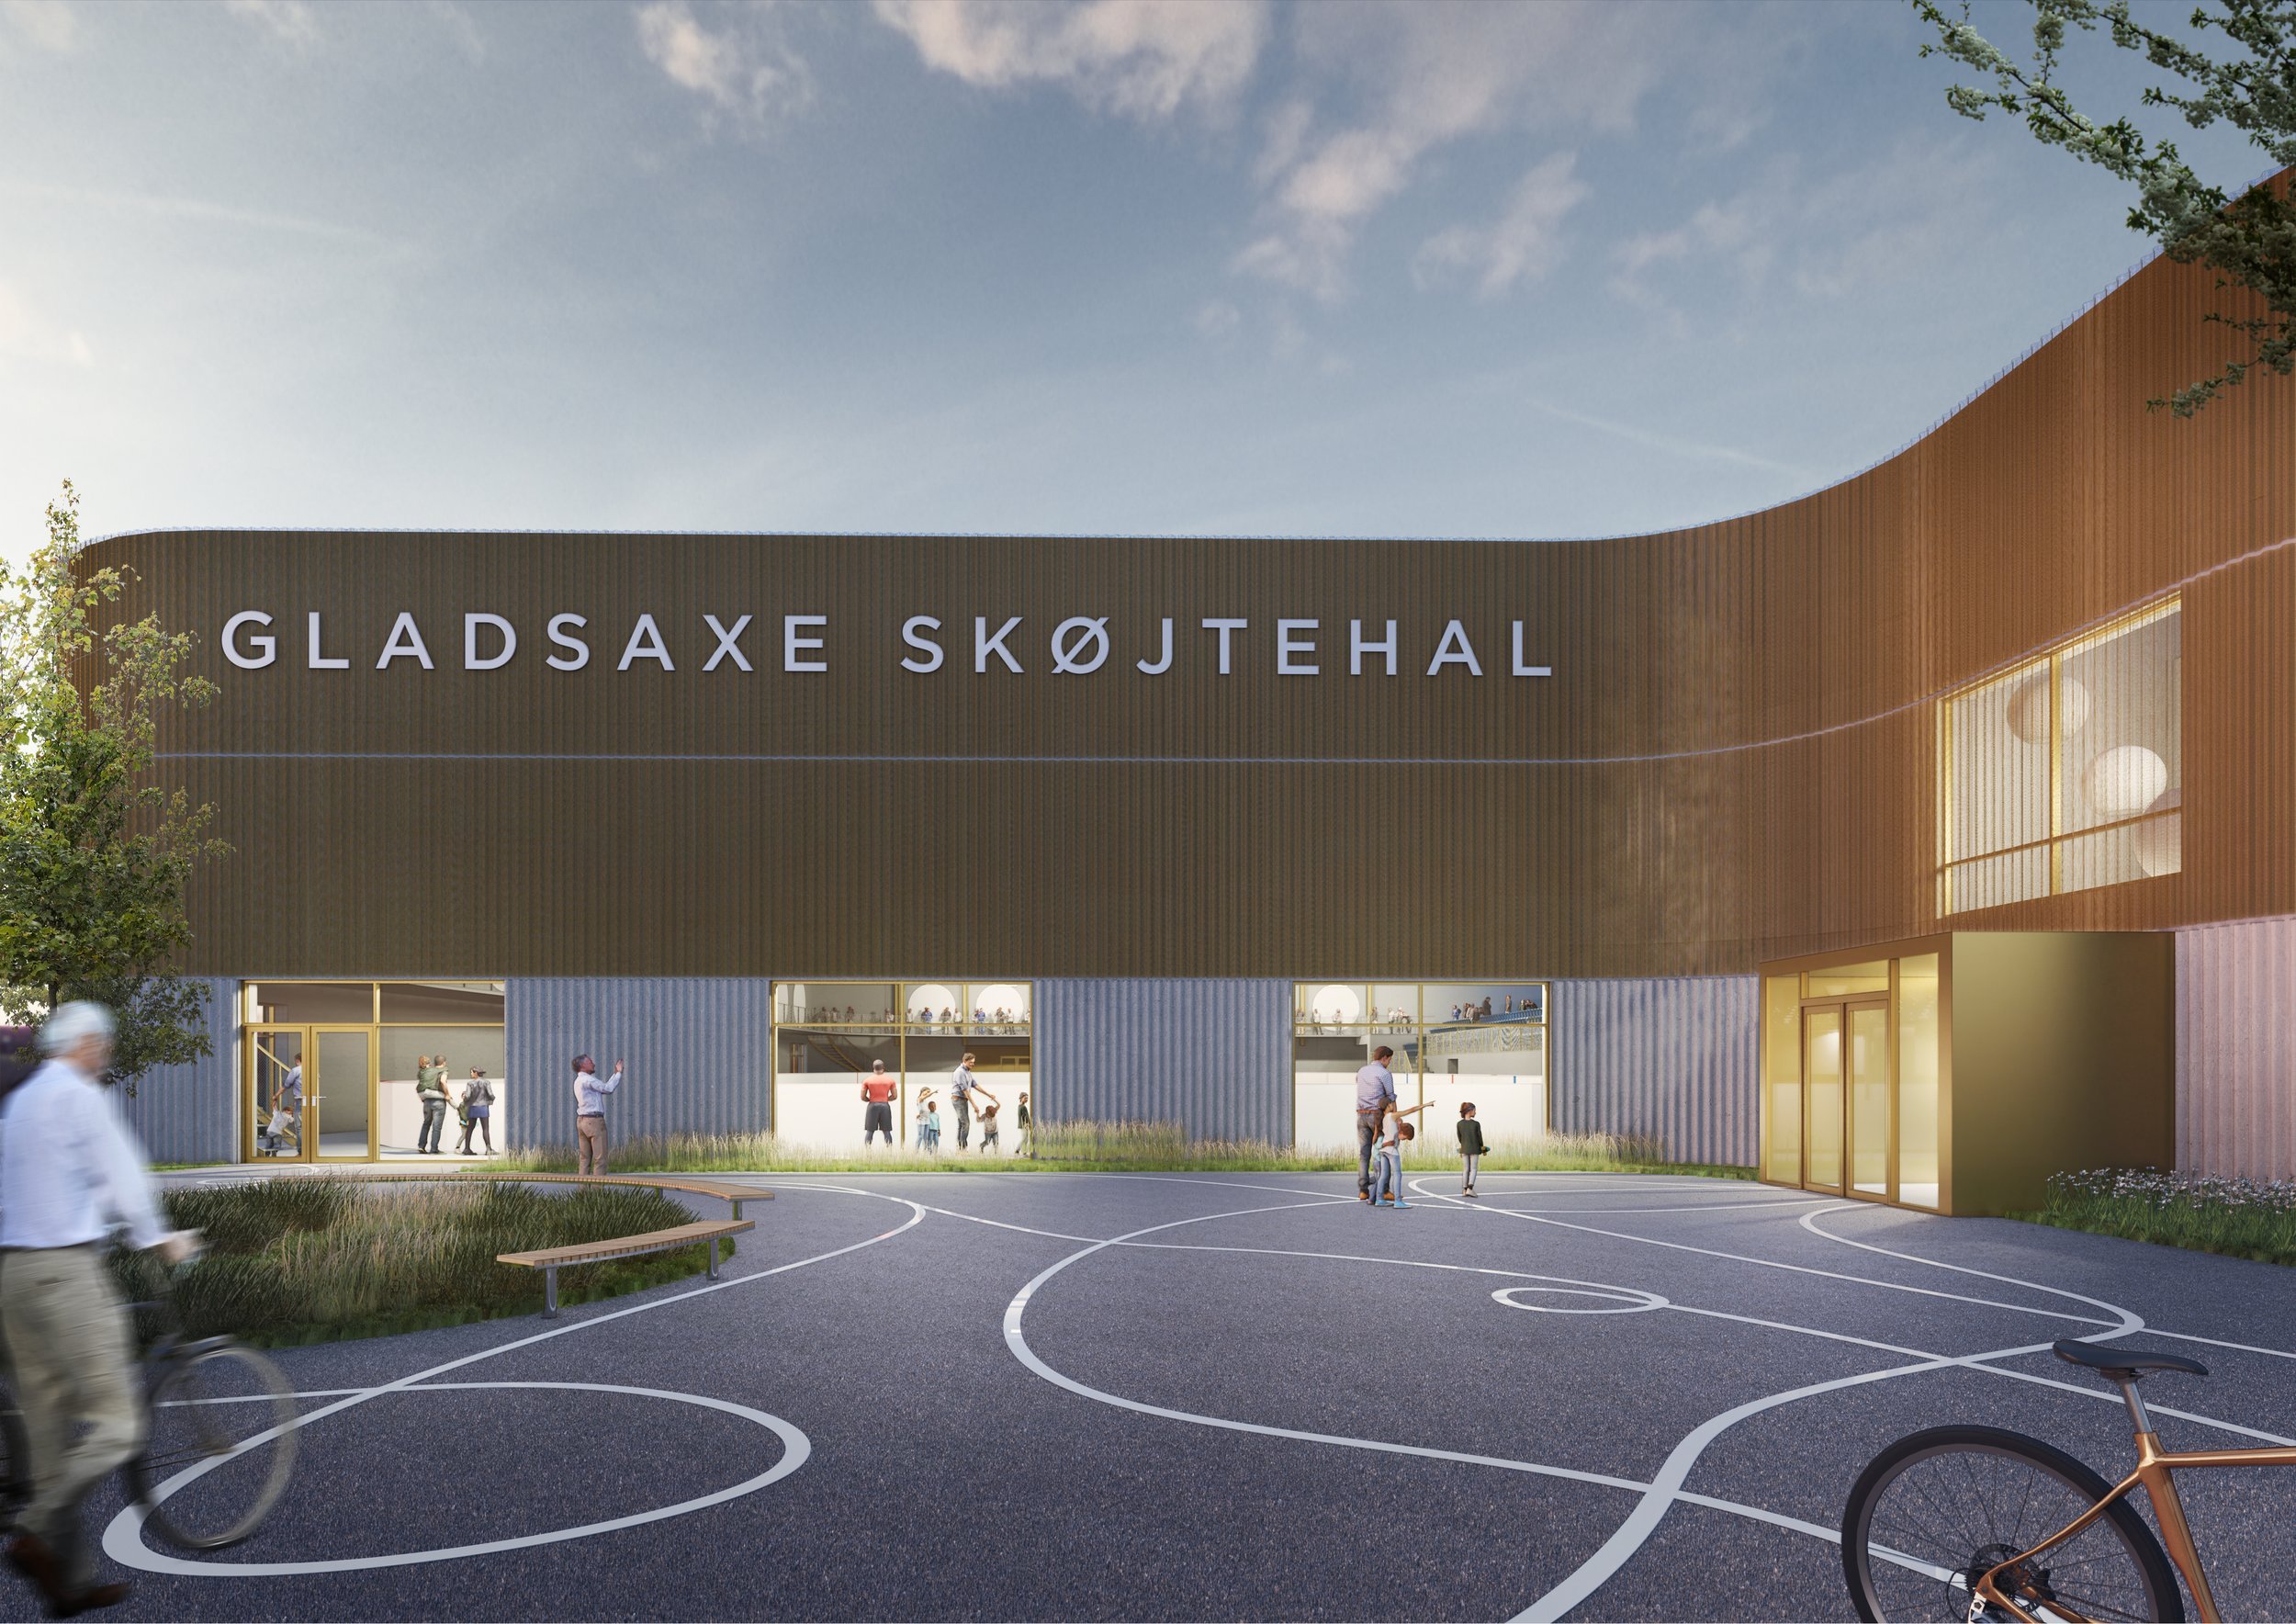 Gladsaxe ice rink